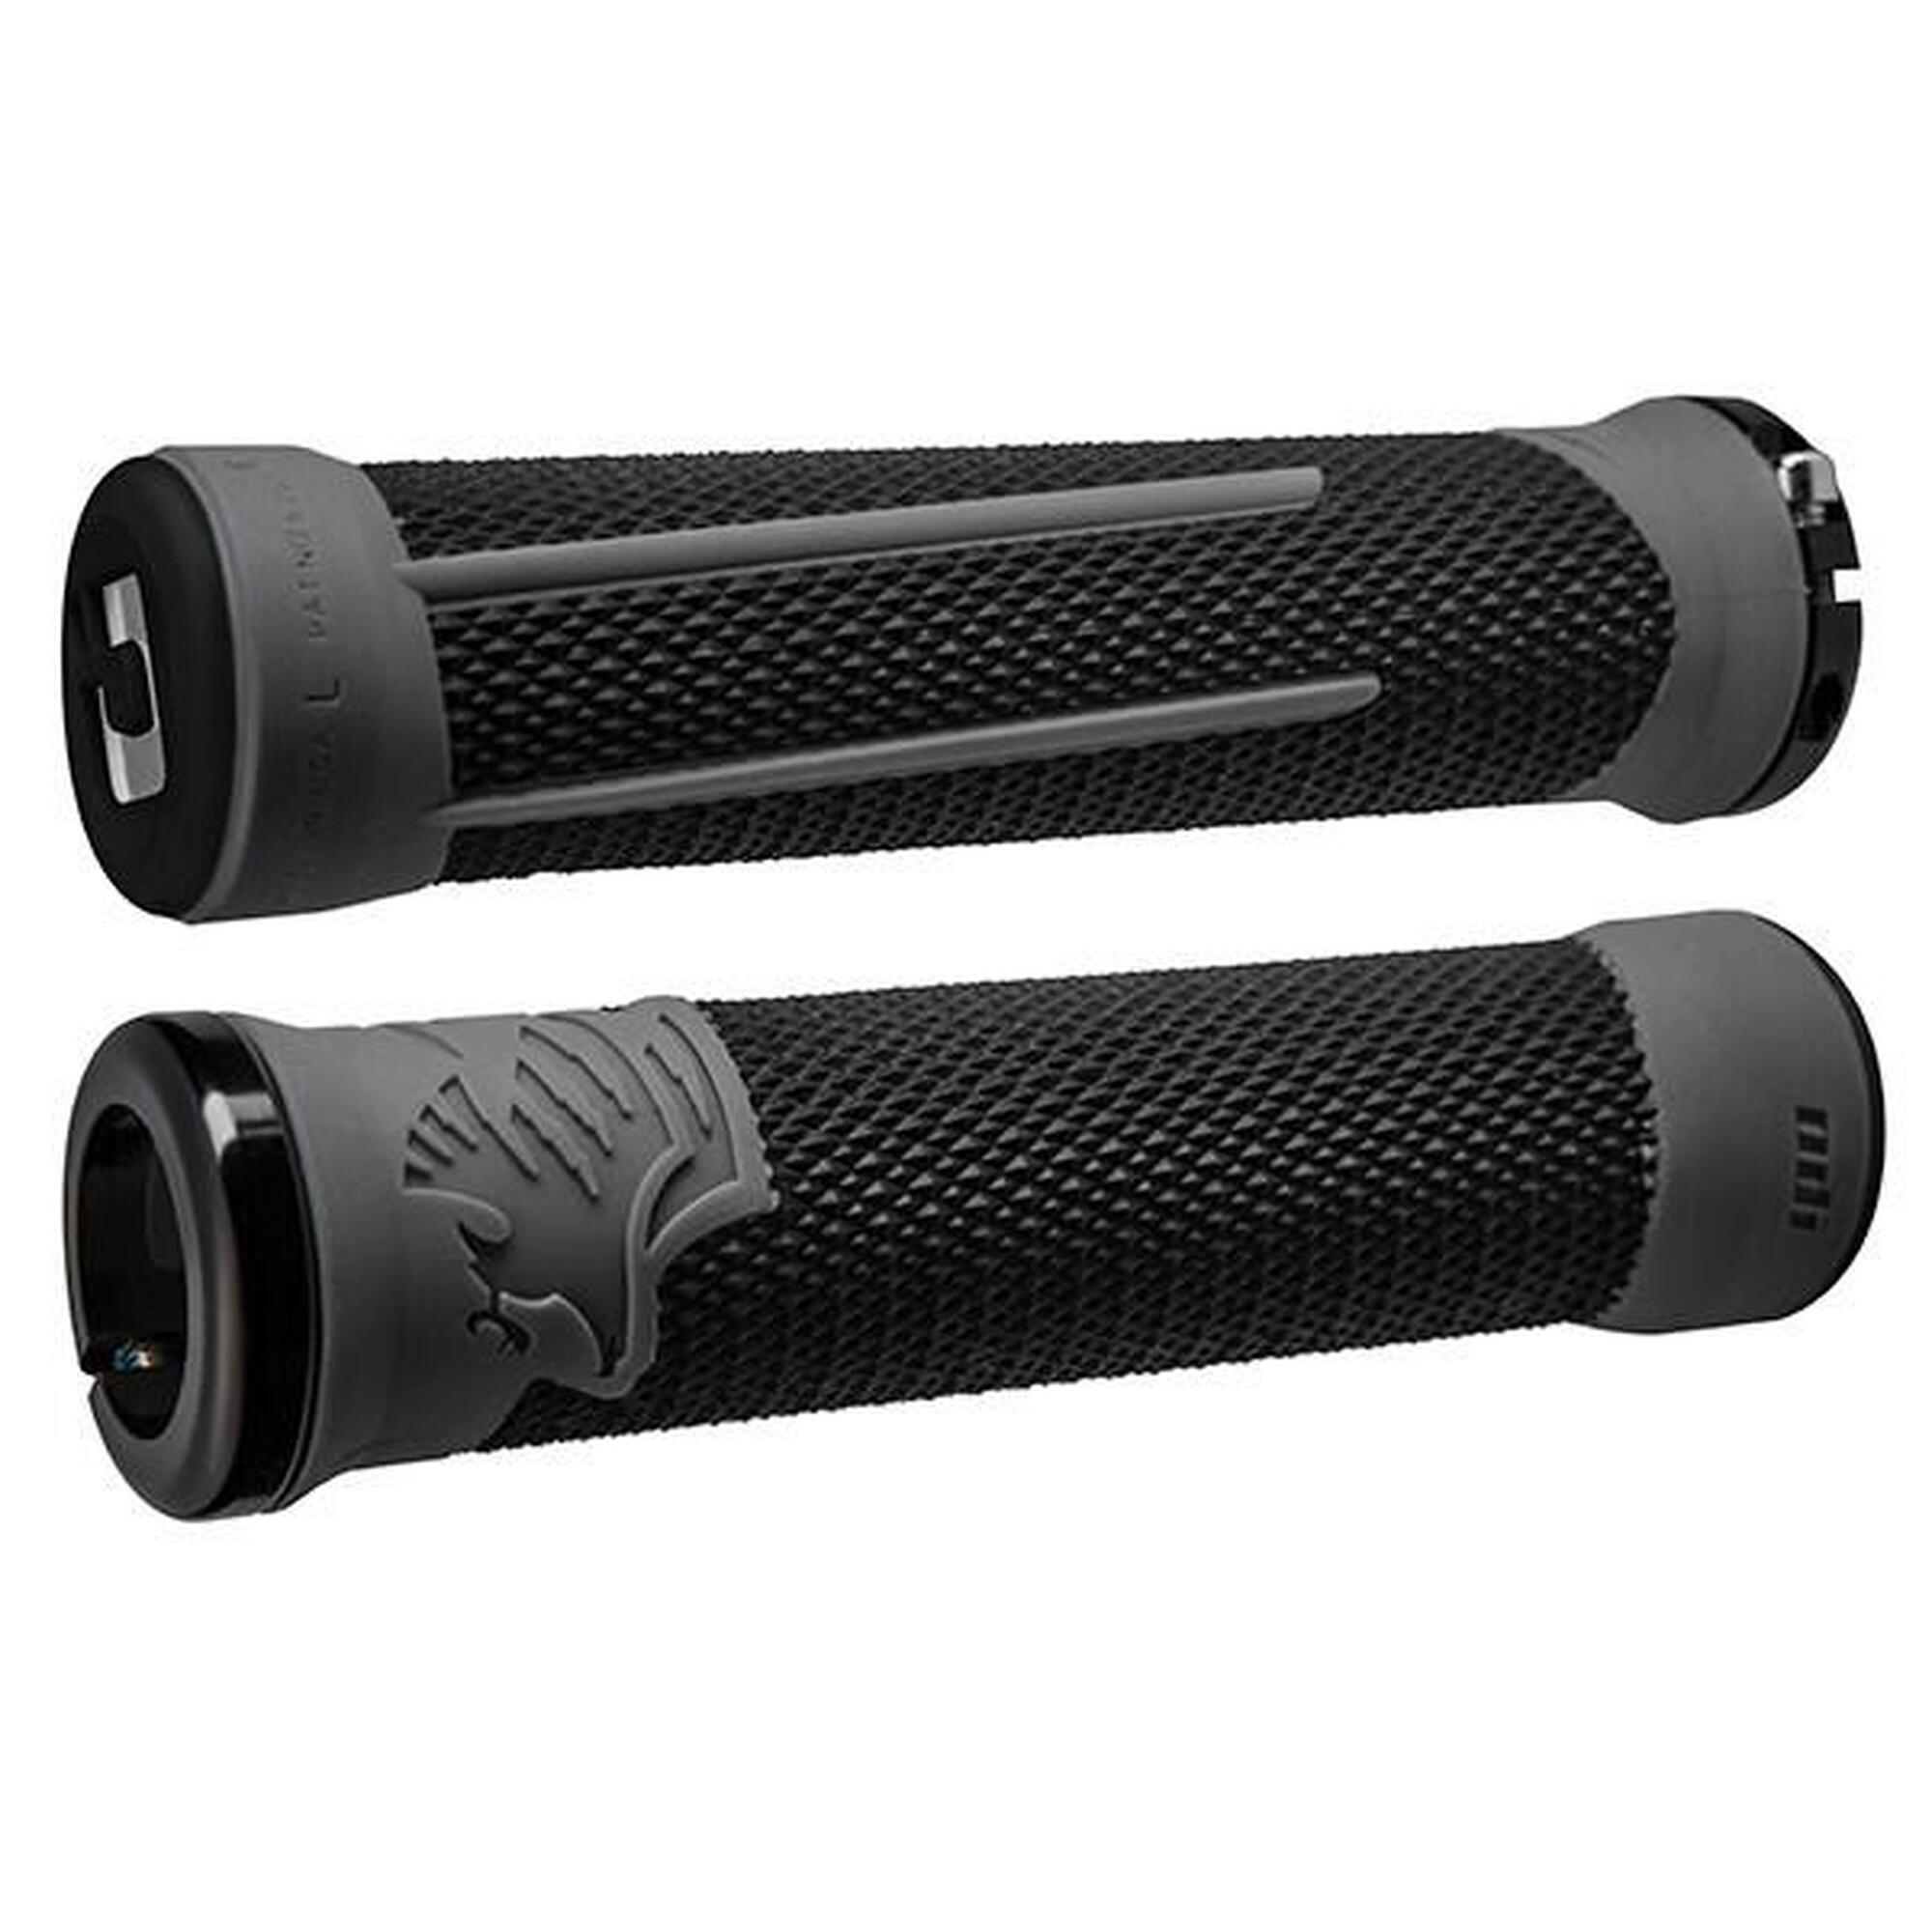 AG-2 SIGNATURE V2.1 BICYCLE LOCK ON GRIPS - BLACK/GRAPHITE